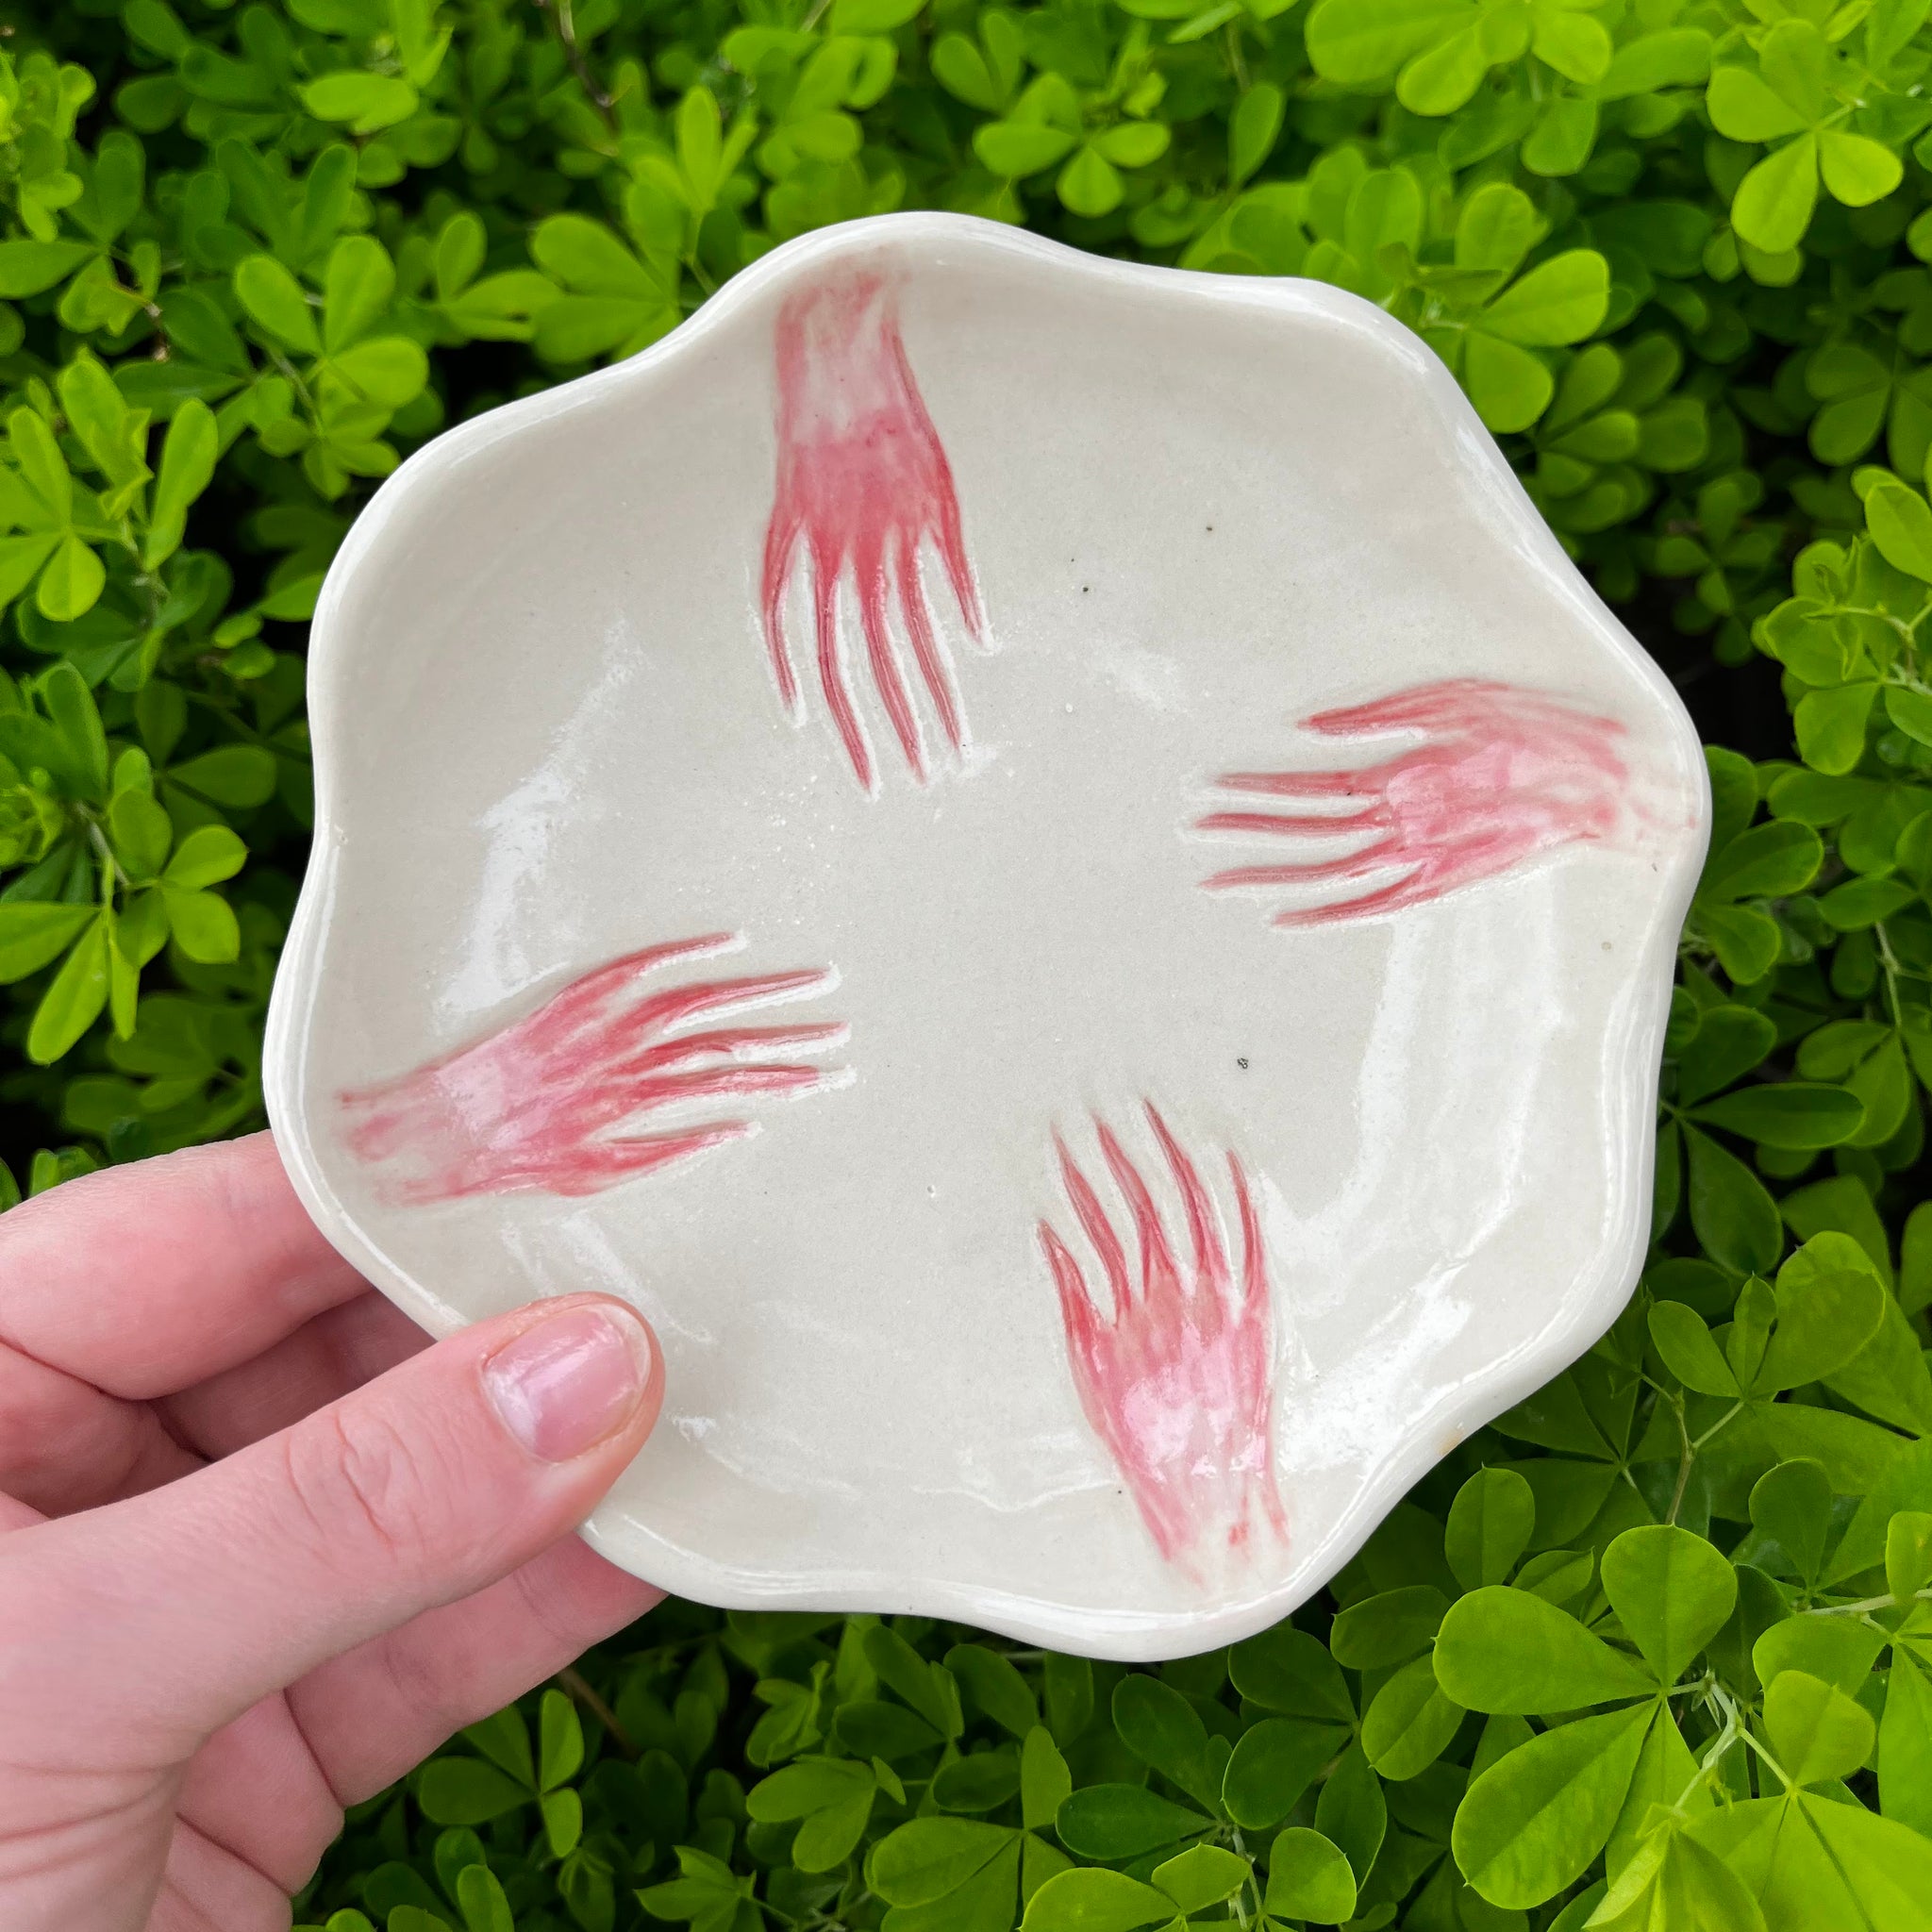 Hands Dish - Red Handed